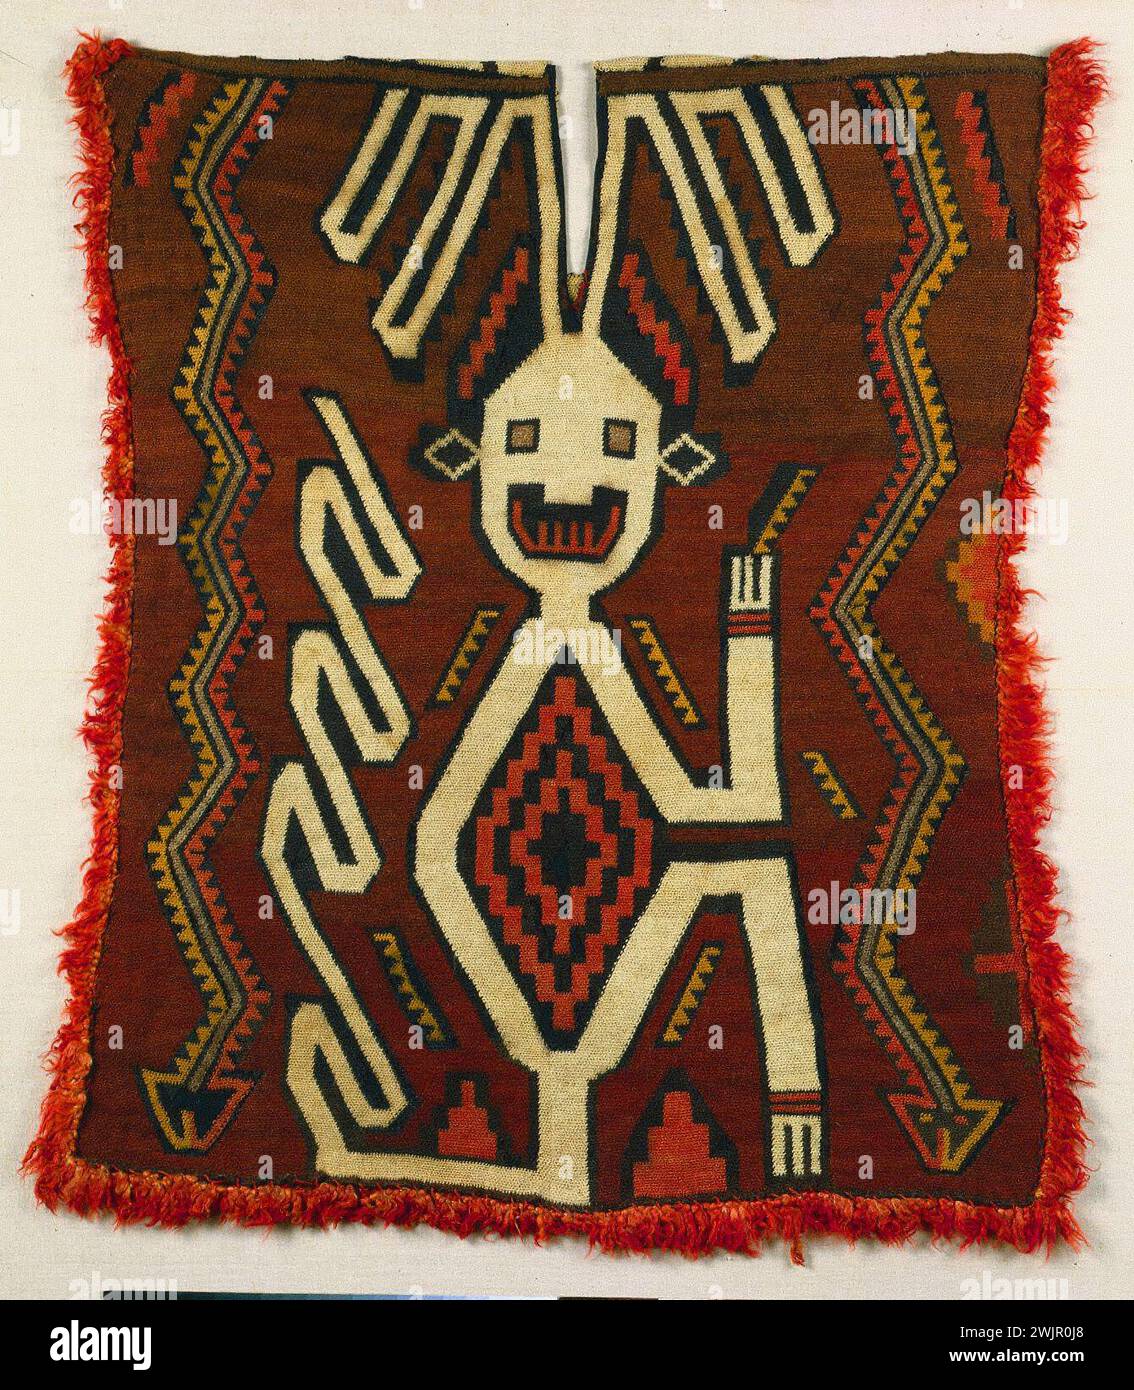 Tunic, Peru, South Coast, Ica Valley, Paracas people, 400–200 BCE.  Looped camelid fiber.  The striking, large-scale figure shown on this tunic has an elaborate, monkey-like tail as well as head appendages that mark the creature as supernatural. This tunic, a relatively rare type, was made not on a loom but rather by working the yarns into loops with a needle. It is made entirely with camelid fiber, which can readily be dyed in a range of vivid colors. The fiber comes from one of the four camels (camelids) native to the Andes Mountains—the alpaca and llama, both domesticated, an Stock Photo